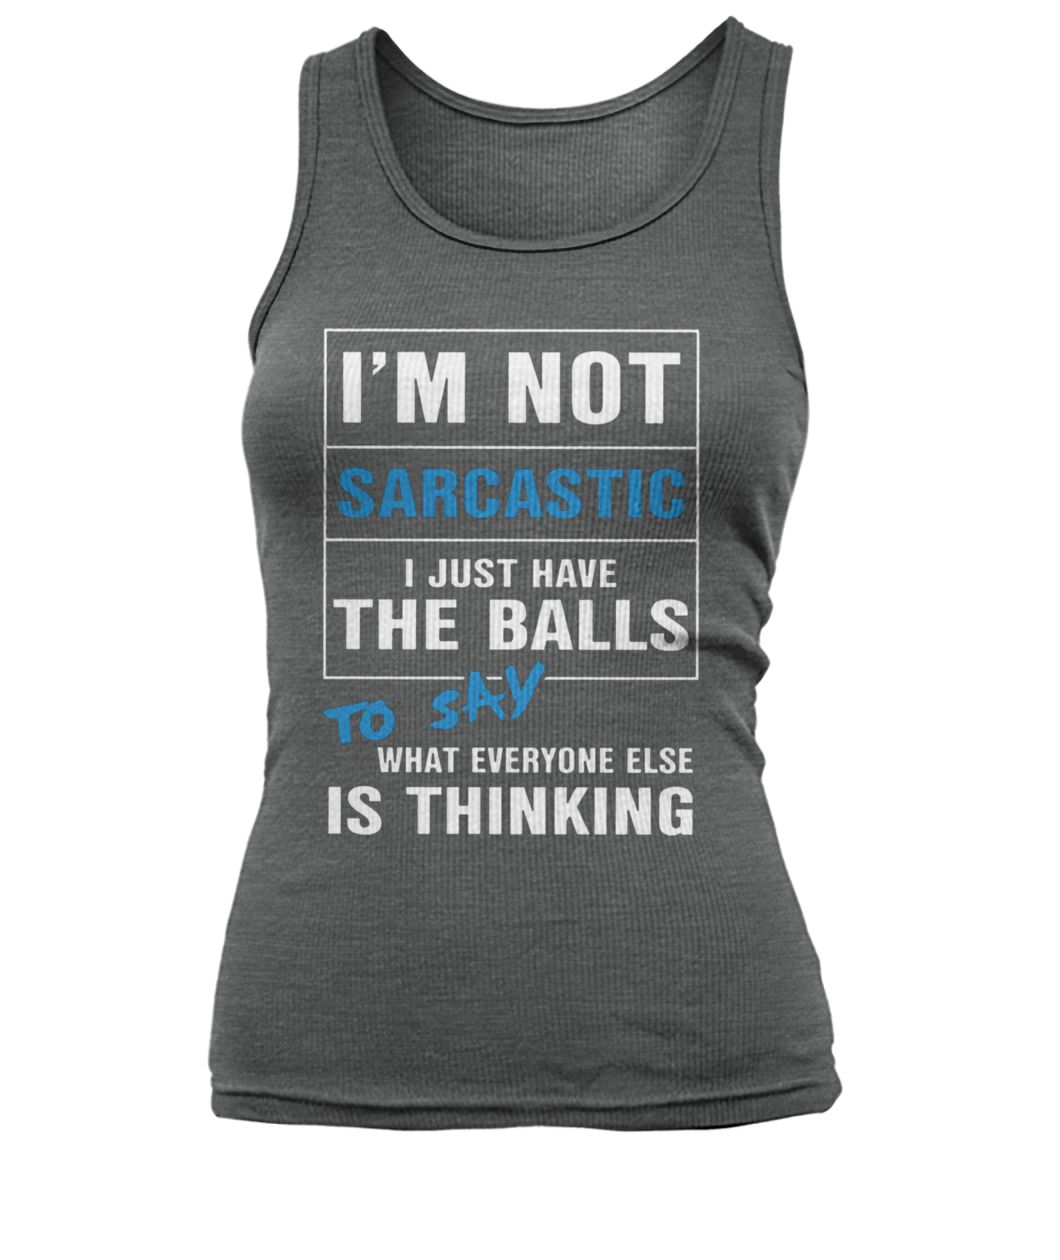 I’m not sarcastic I just have the balls to say what everyone else is thinking women's tank top